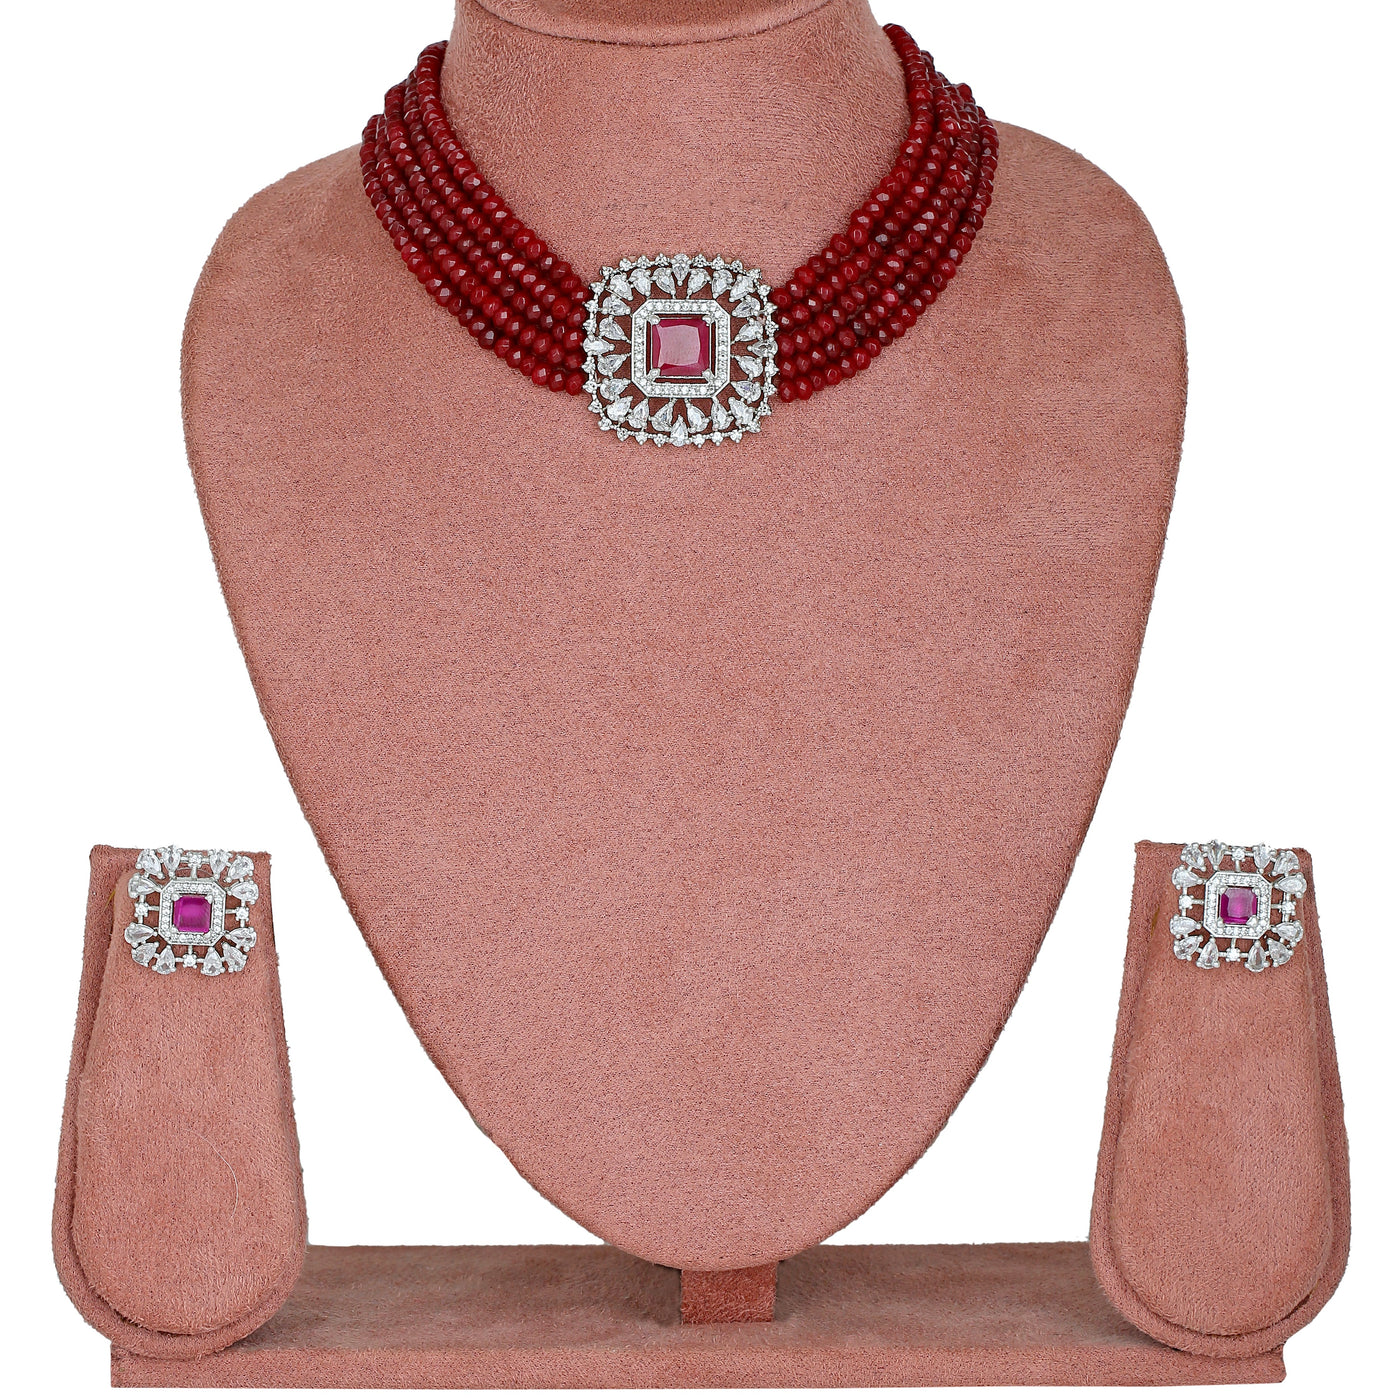 Estele Rhodium Plated CZ Square Choker Necklace Set with Ruby/ Red Beads for Women